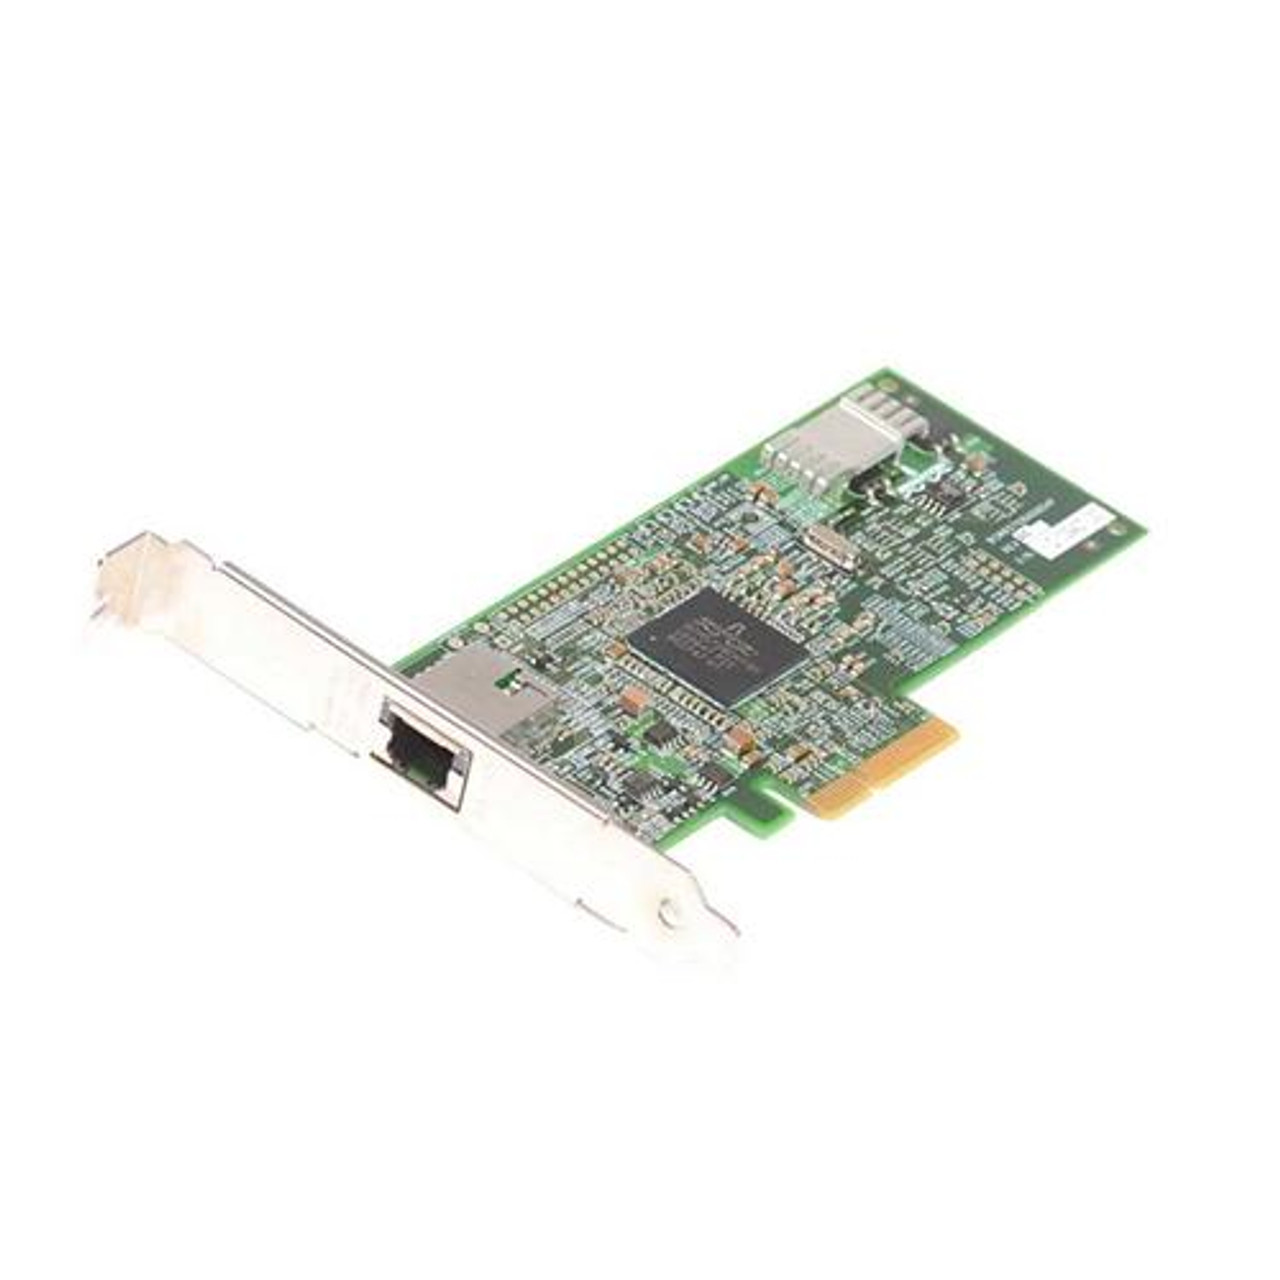 39Y607006 IBM NetXtreme II 1000 Express Single-Port 1Gbps 10Base-T/100Base-TX/1000Base-T Gigabit Ethernet PCI Express x4 Network Adapter by Broadcom for